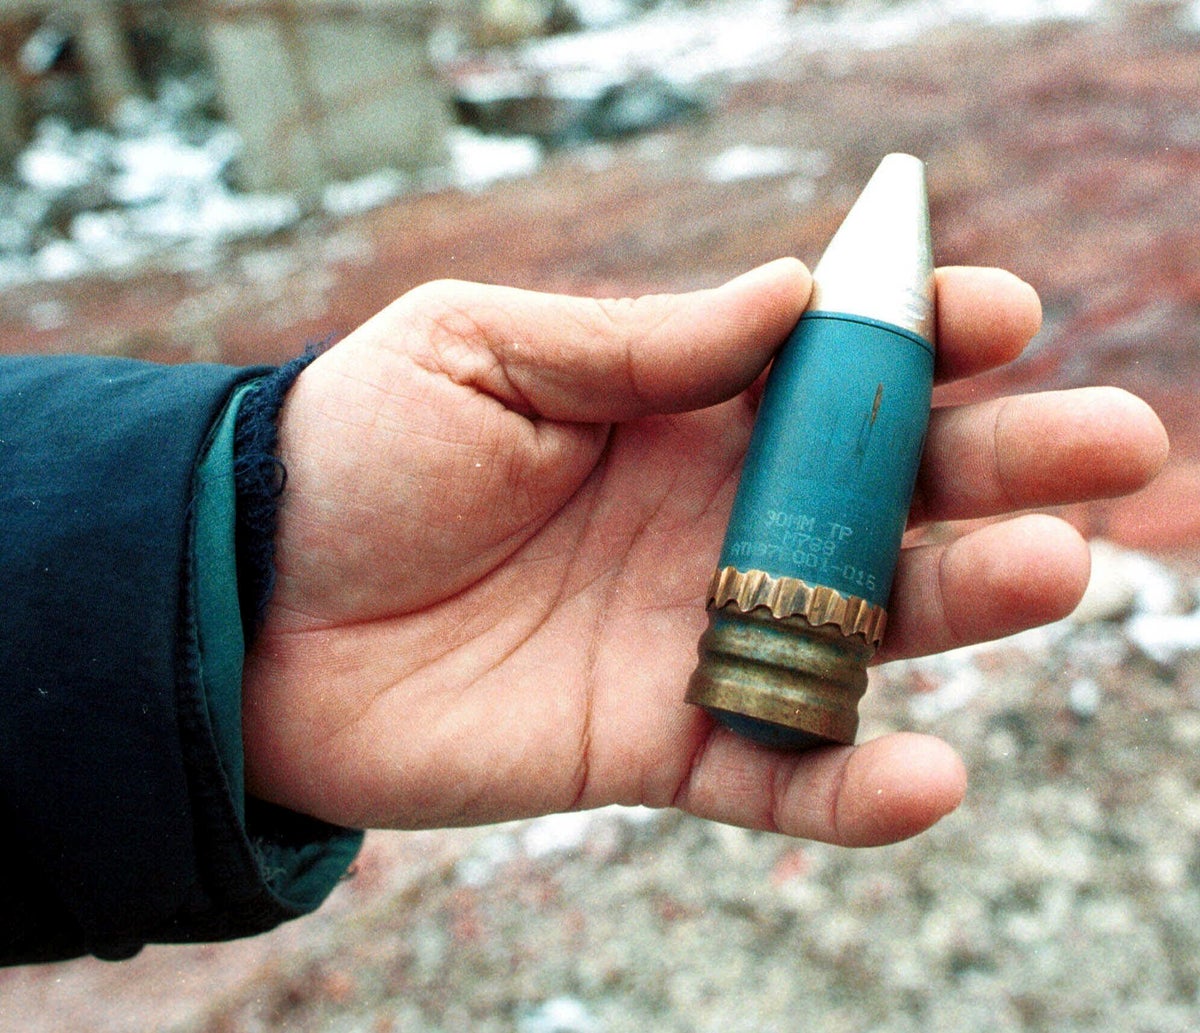 A look at the uranium-based ammo the UK will send to Ukraine